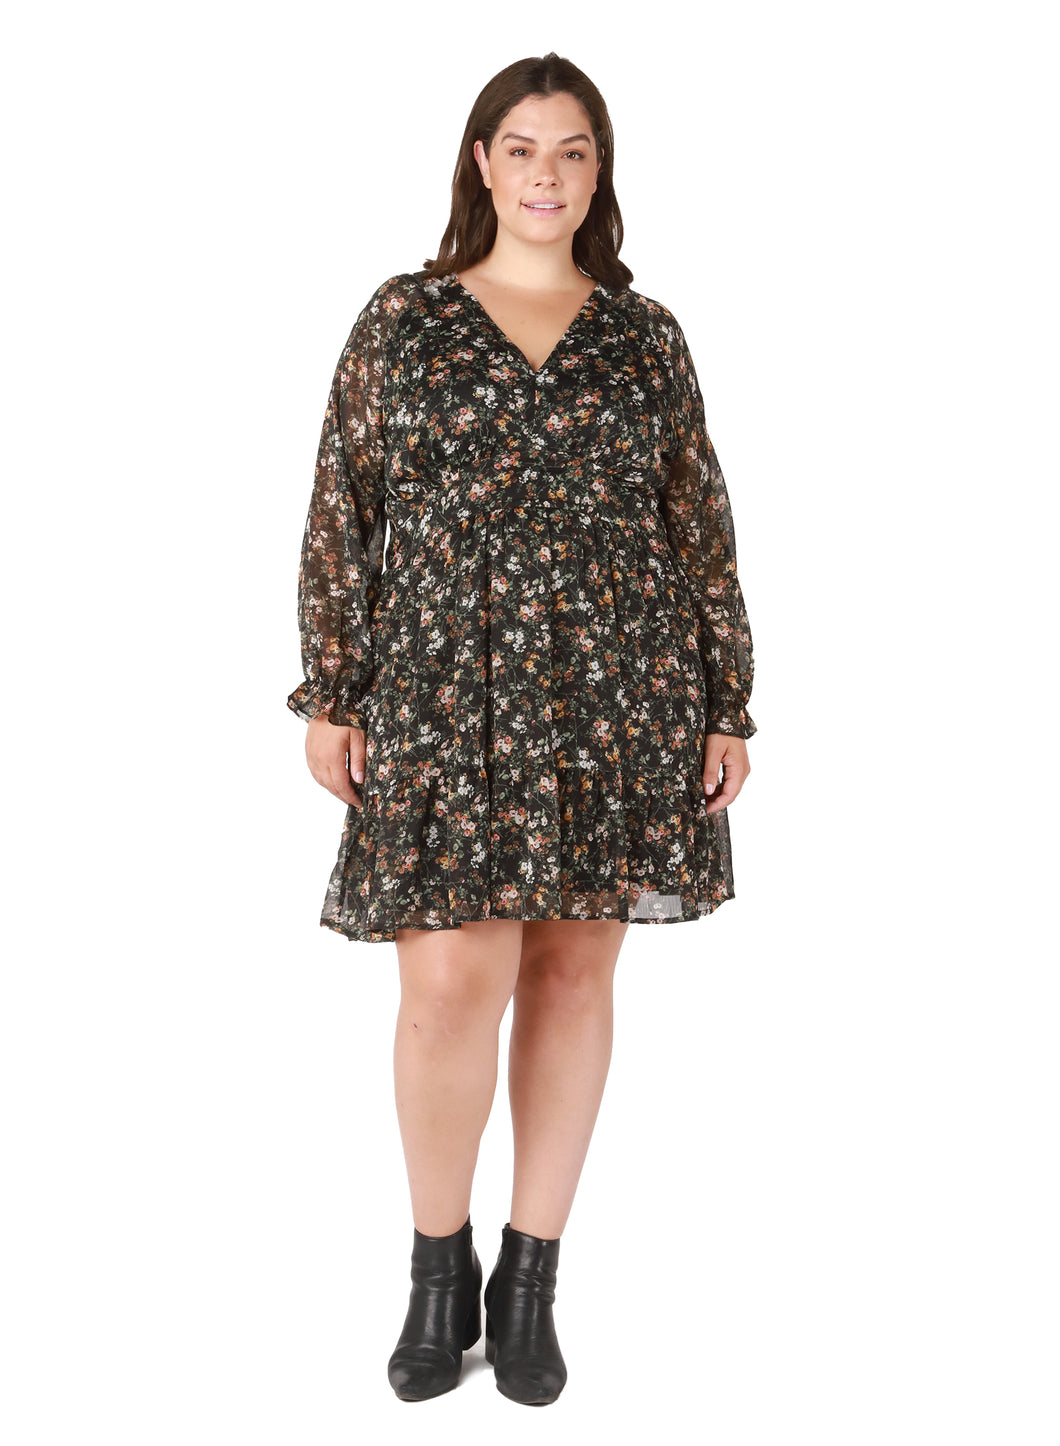 TIERED WRAP DRESS by Dex (available in plus sizes)